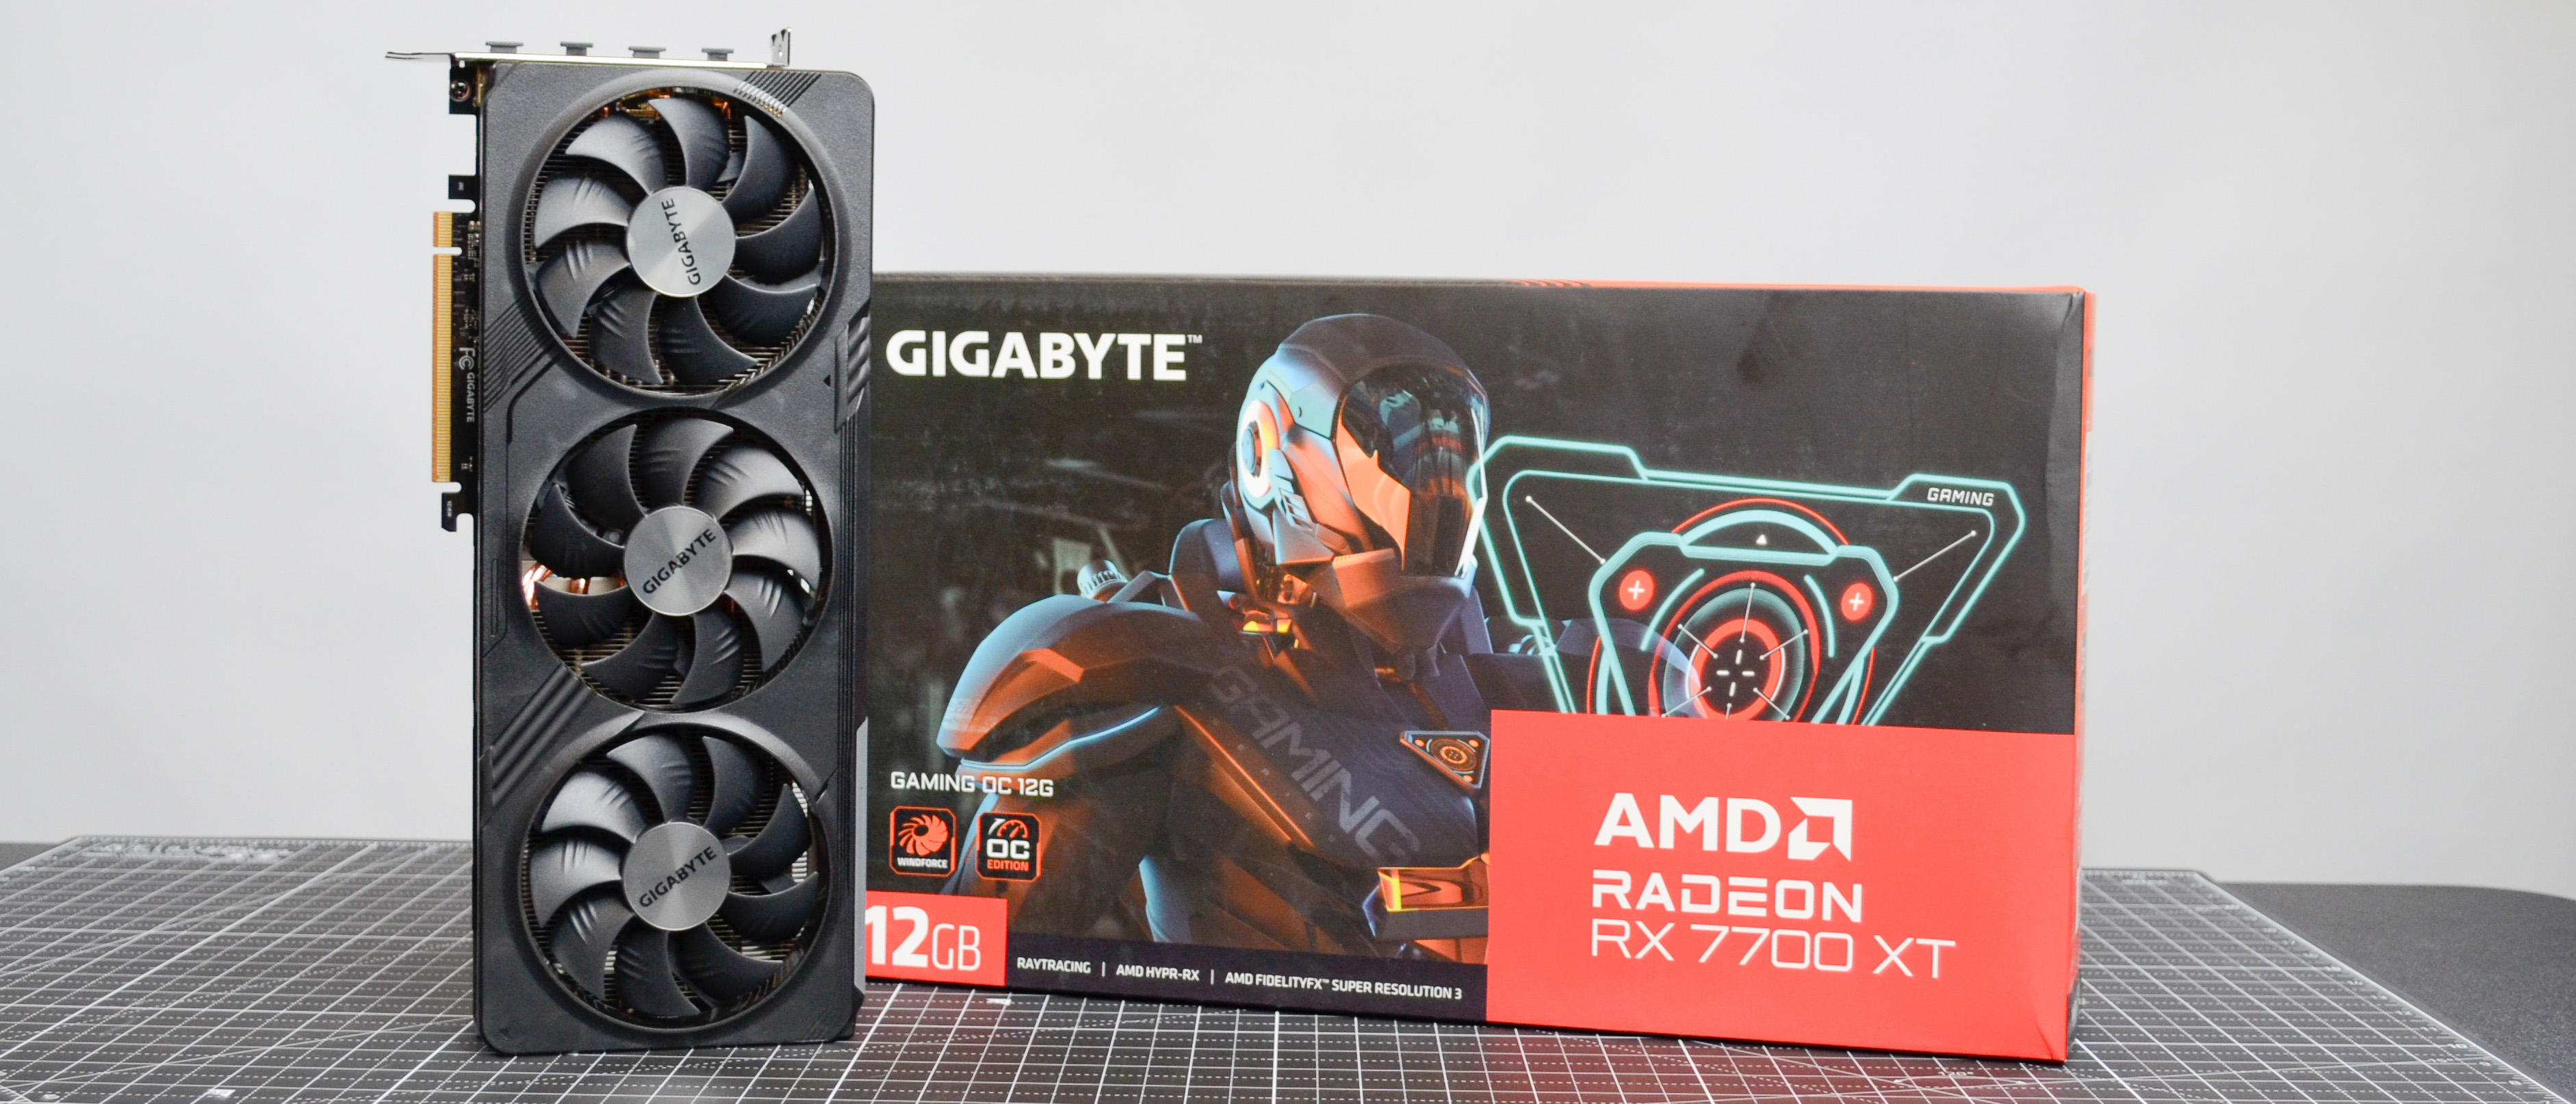 Gigabyte Radeon RX 7700 XT Gaming OC review: great performance for the  price